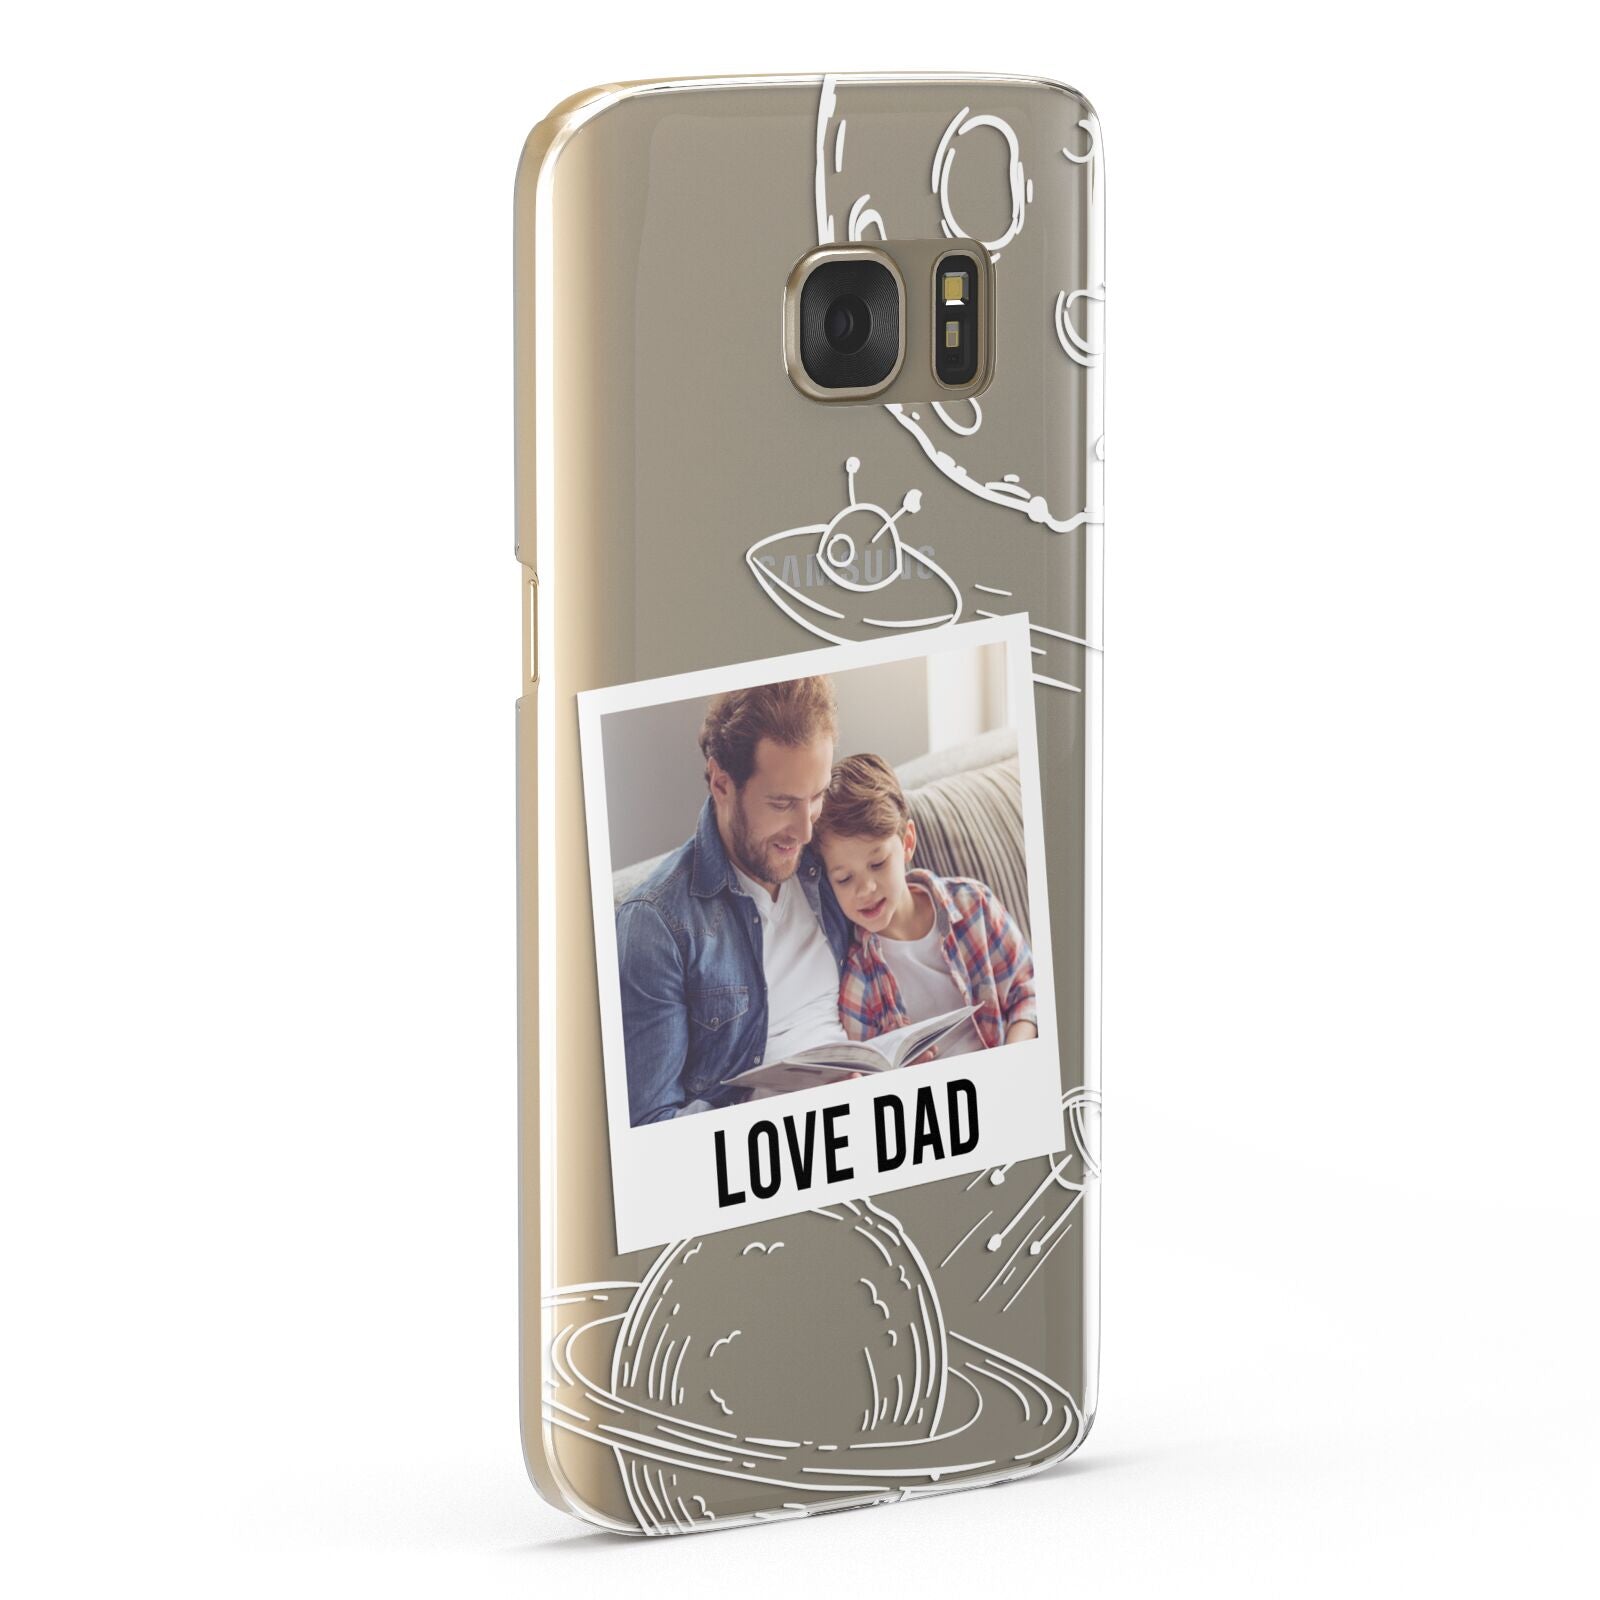 Personalised From Dad Photo Samsung Galaxy Case Fourty Five Degrees